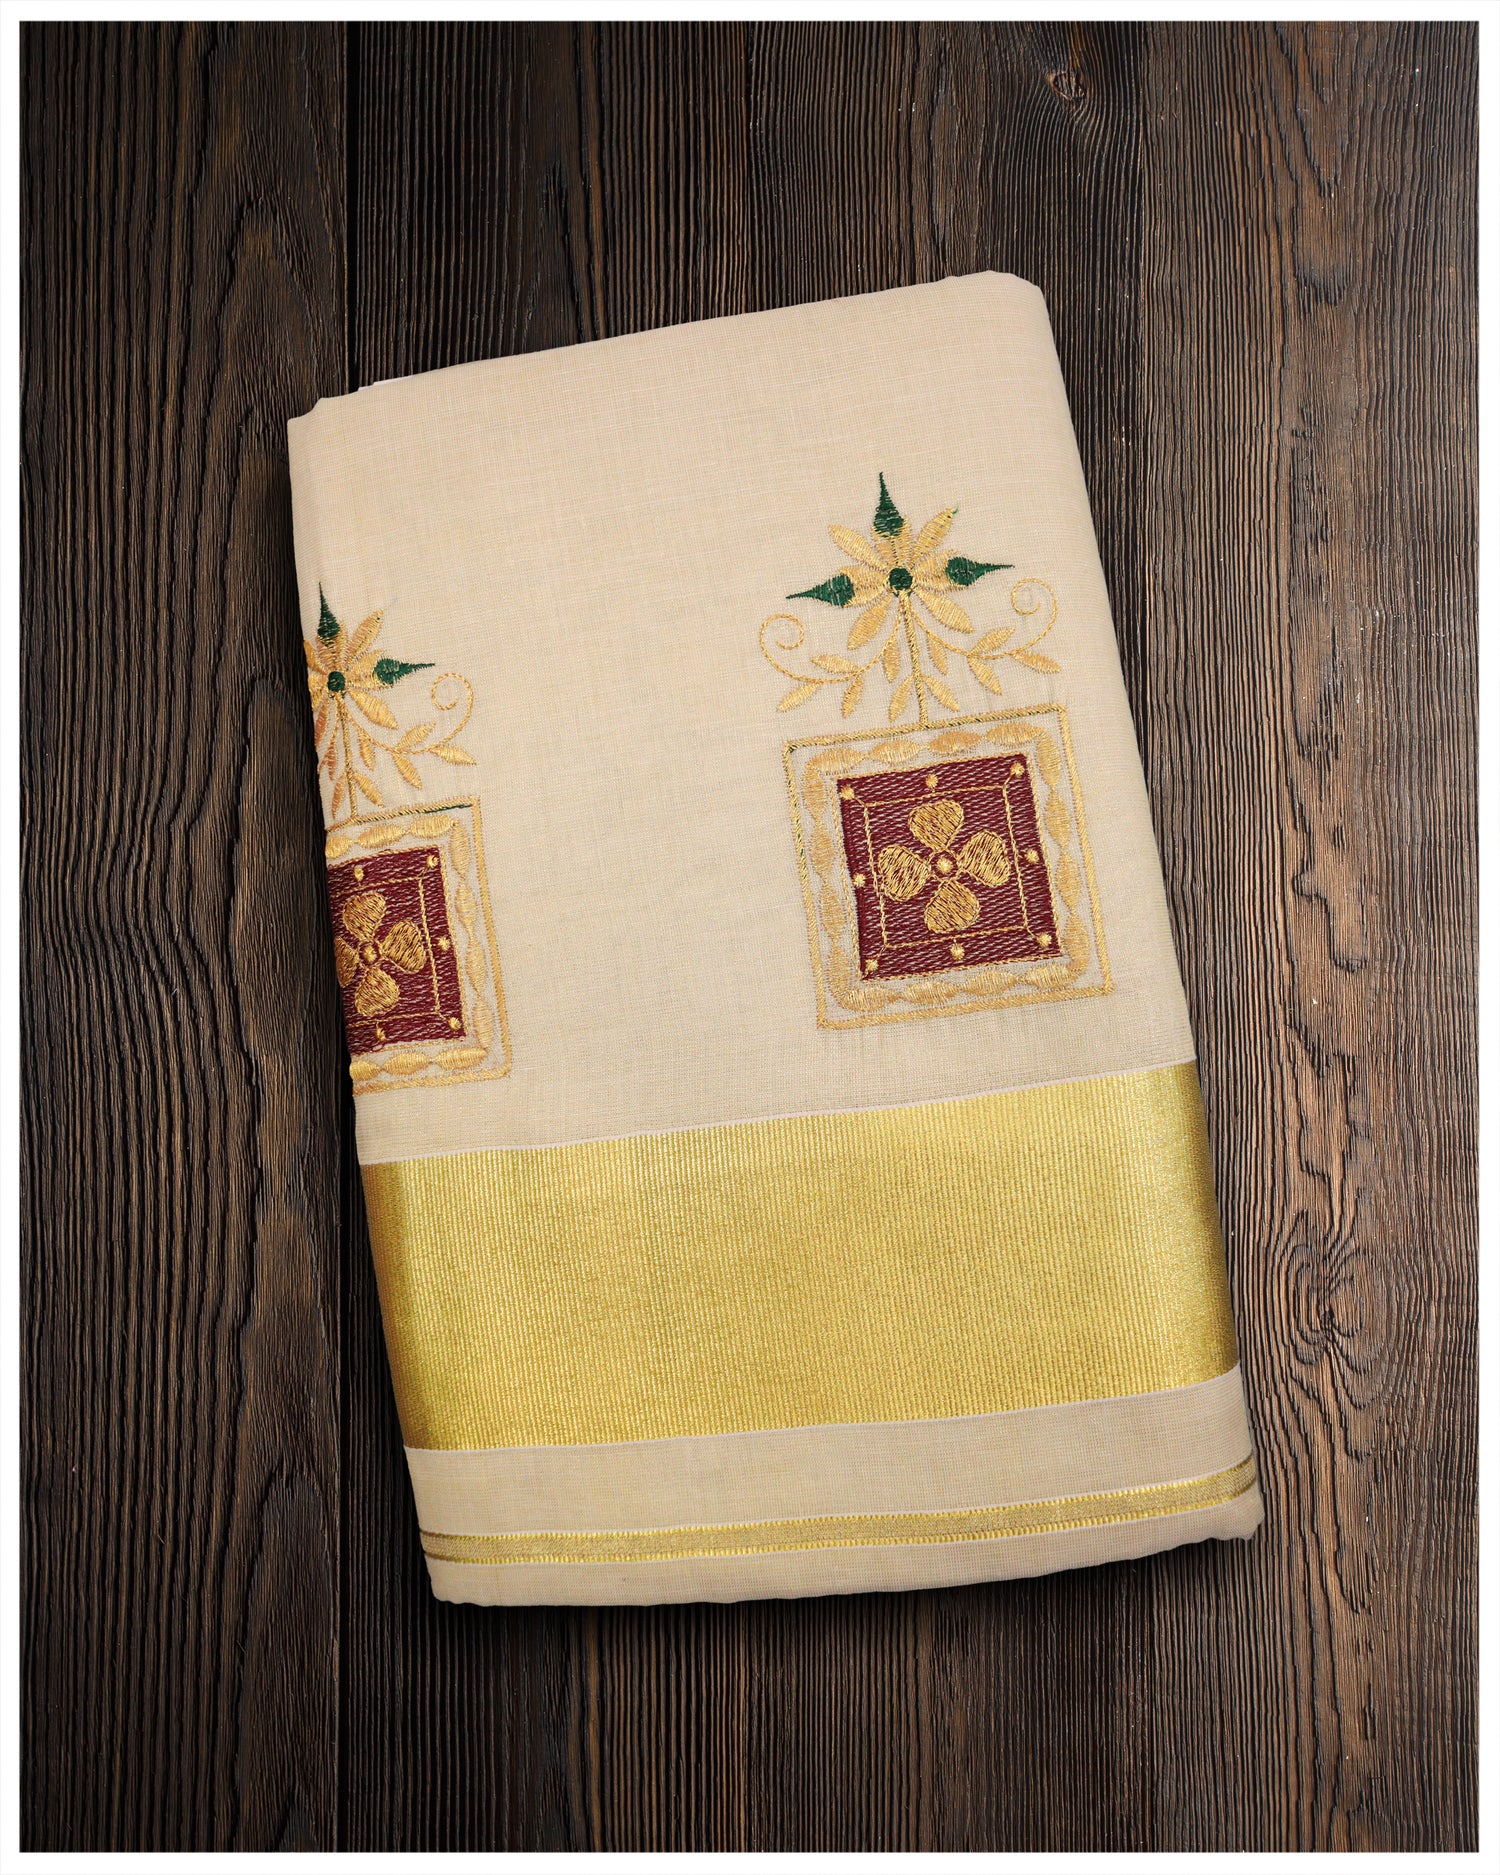 Experience the elegance of traditional Indian wear with this Golden Tissue Set Saree. It features a golden tissue fabric saree that comes with intricate golden kara and threadwork, giving it an exquisite look. Get ready for any special occasion in this stunning saree and make heads turn.